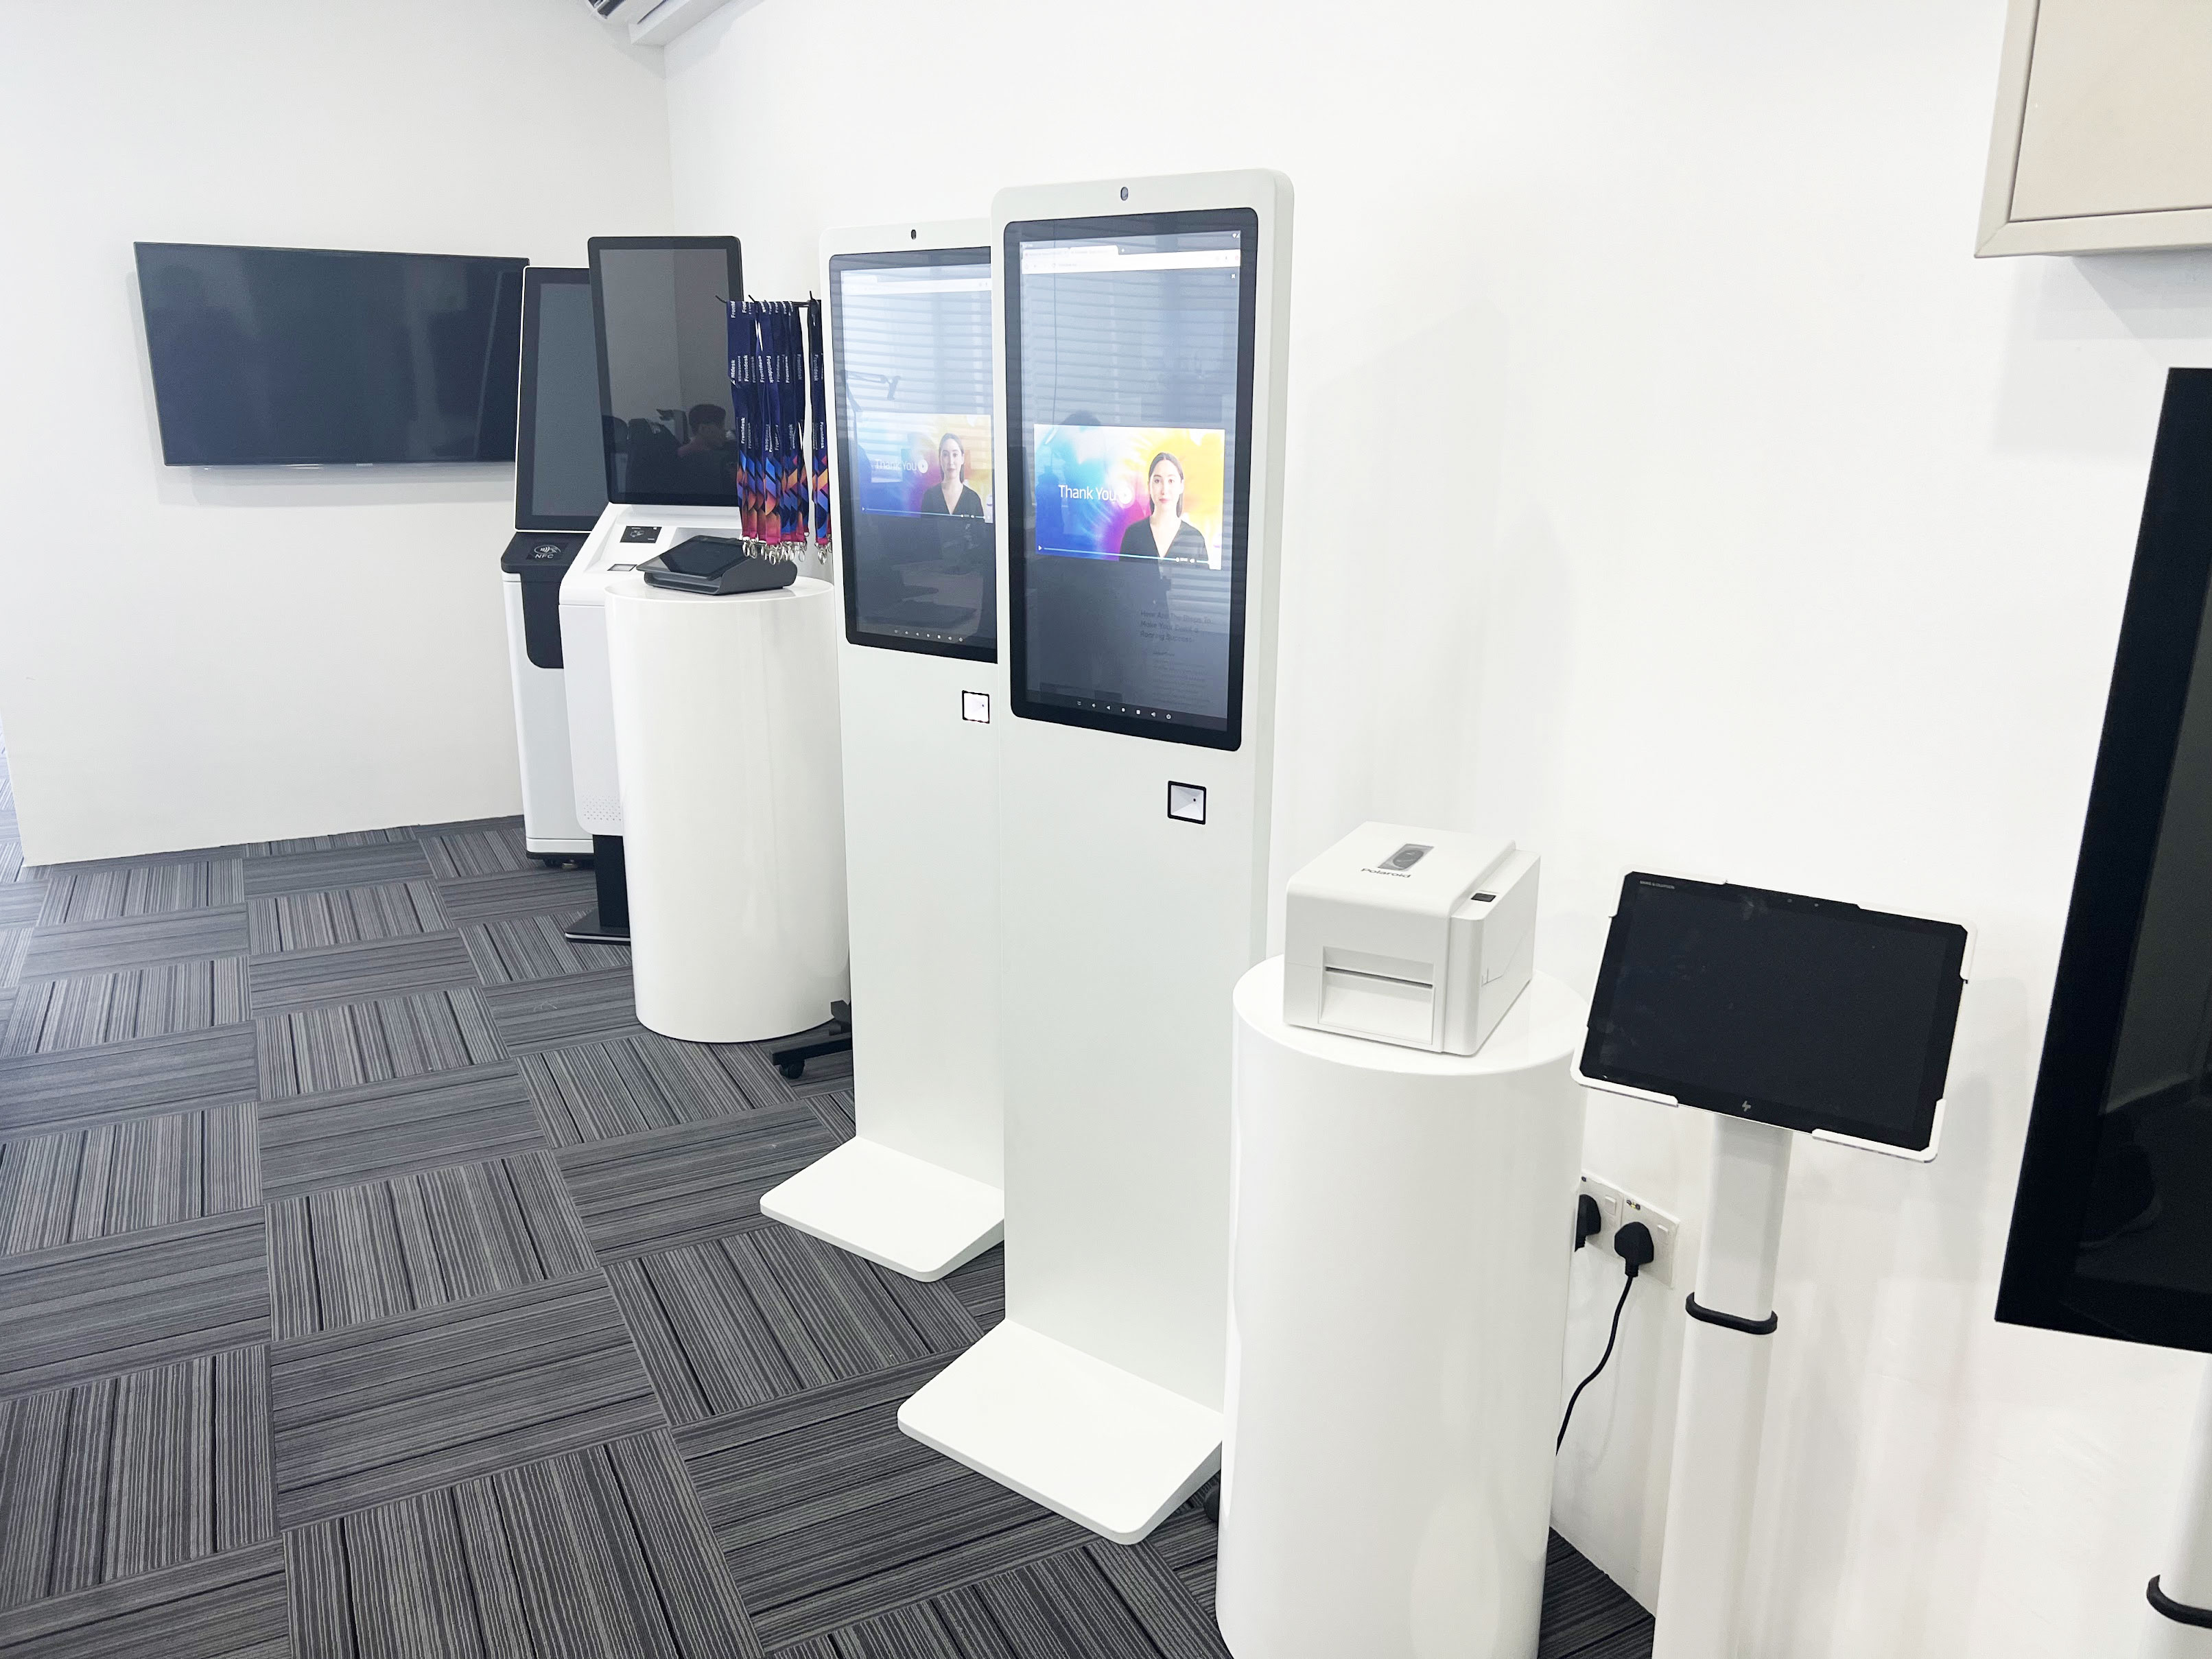 The image showcases our advanced kiosk designed specifically for seamless check-in and badge printing processes. Attendees can conveniently check in by scanning their QR code or providing necessary information using the intuitive interface.